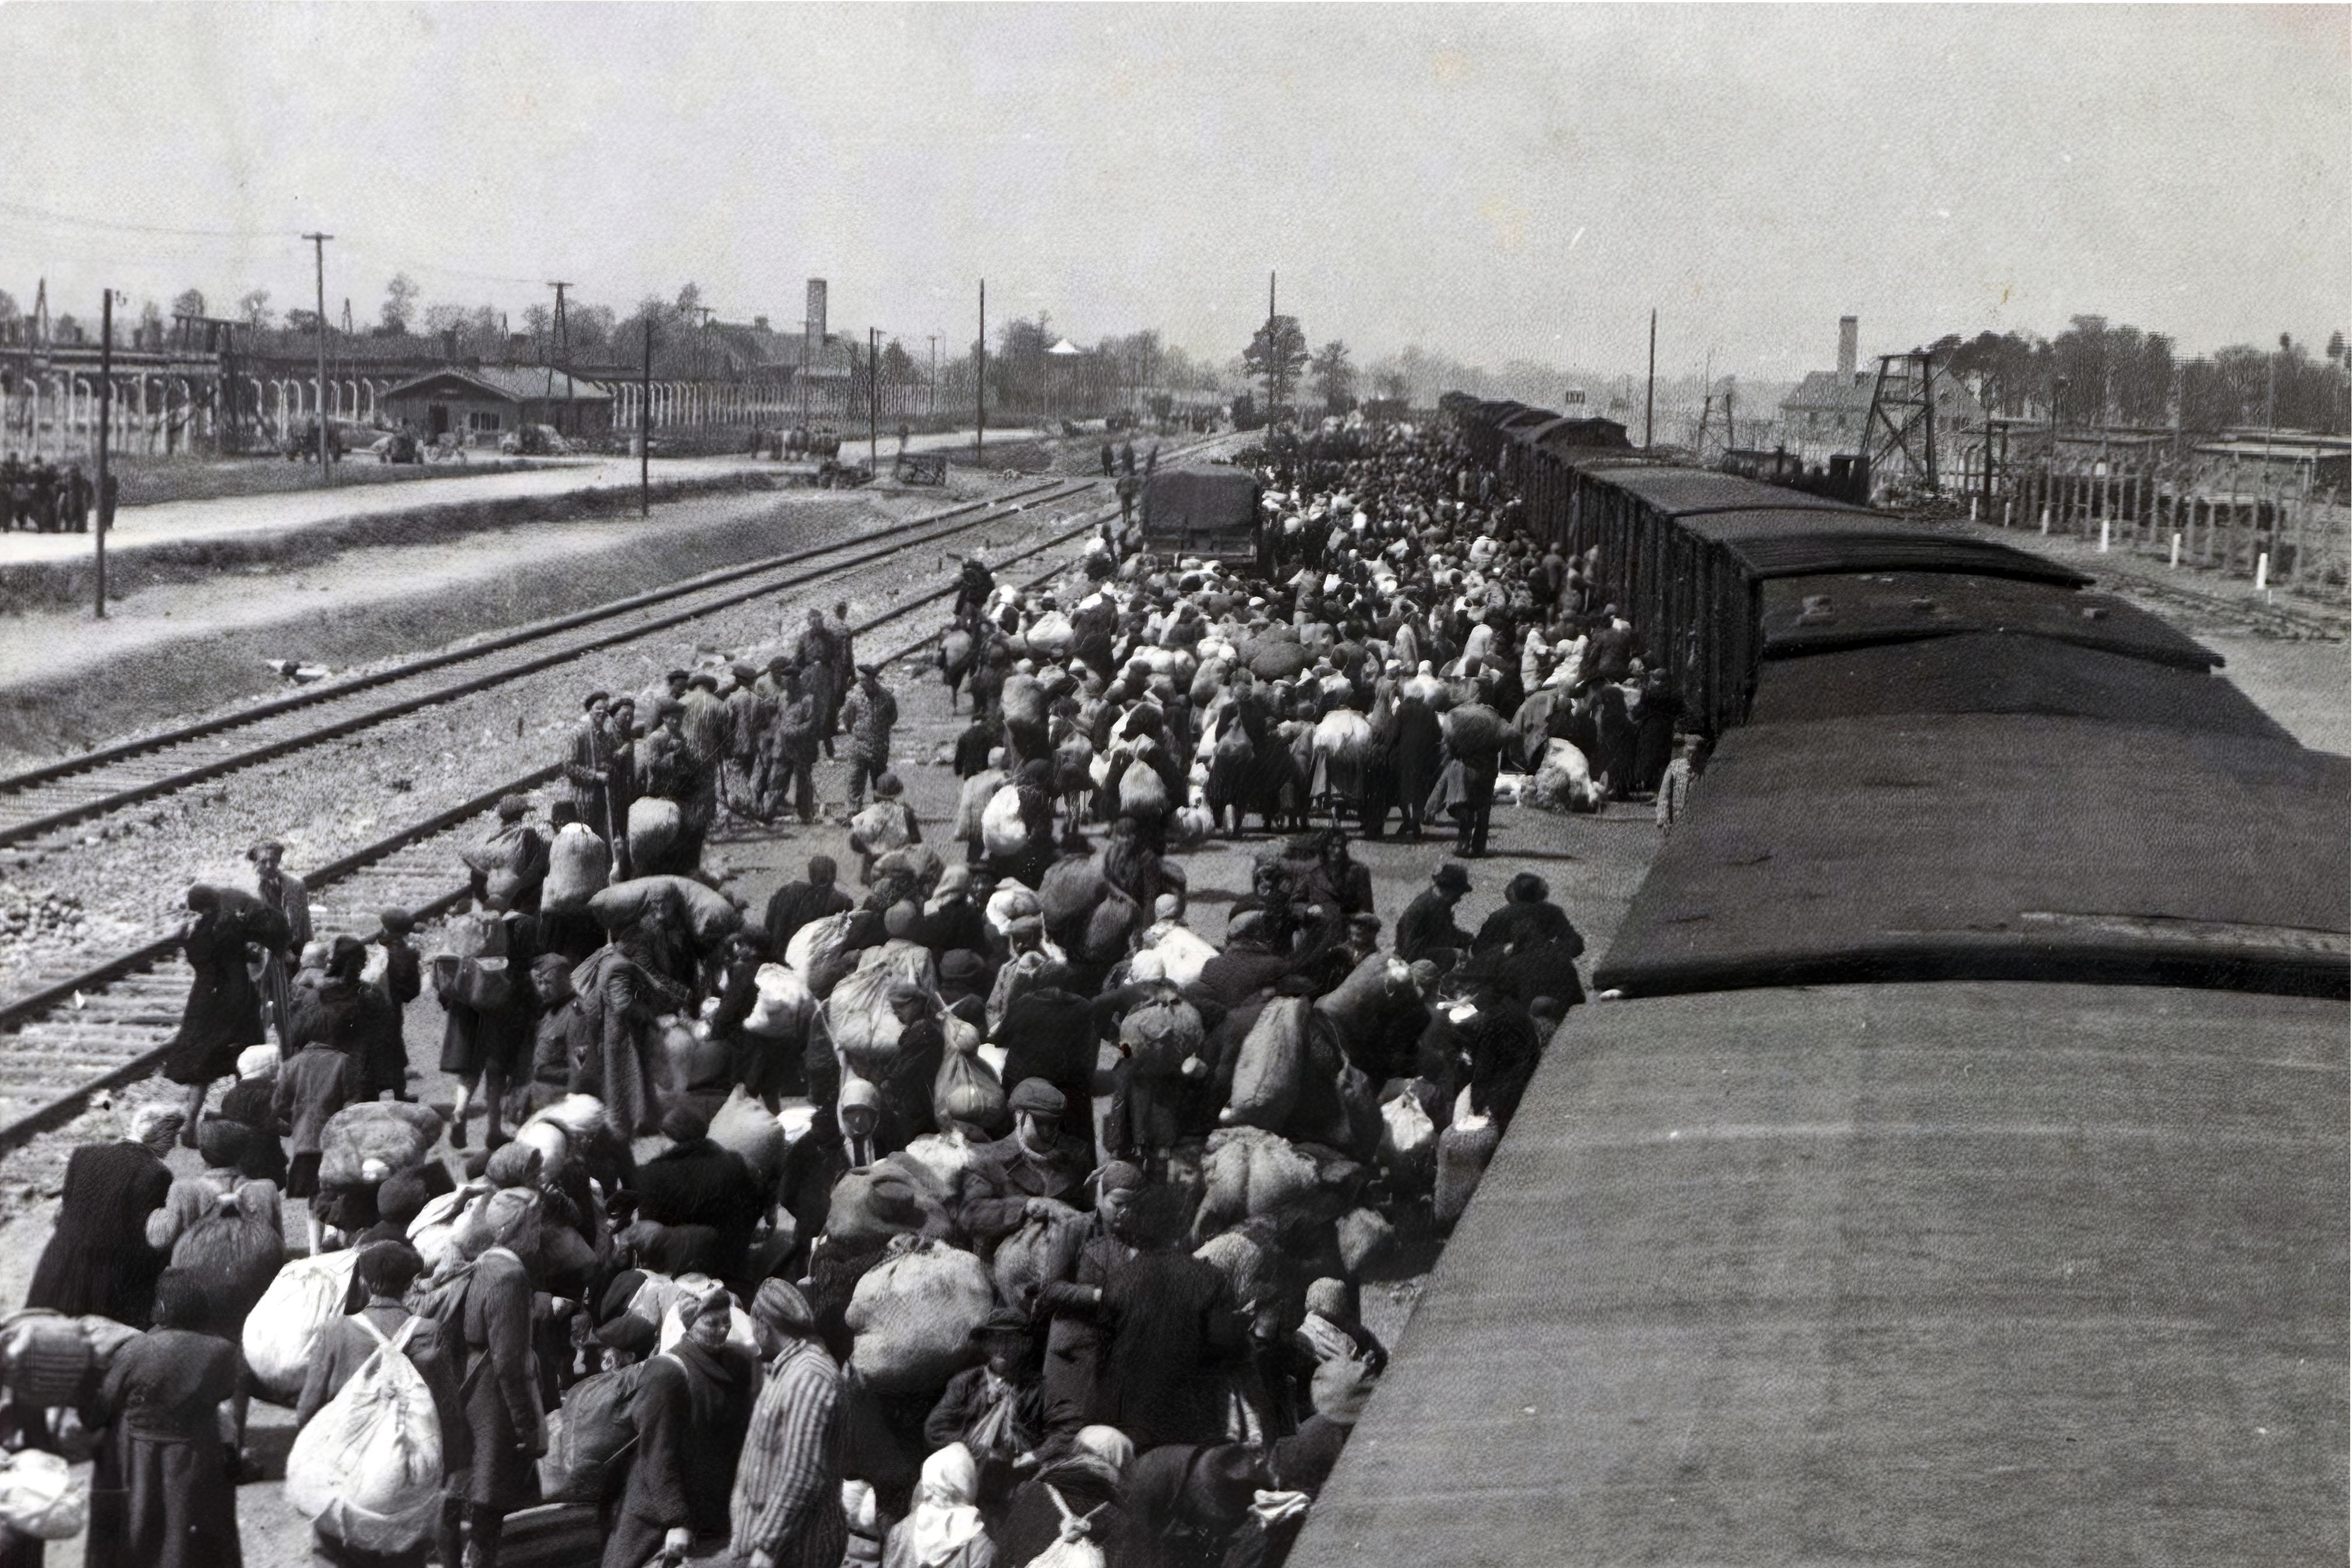 Deported Jews arrive at the concentration camp of Auschwitz / Birkenau / 1944. Credit: Fortepan / Lili Jacob